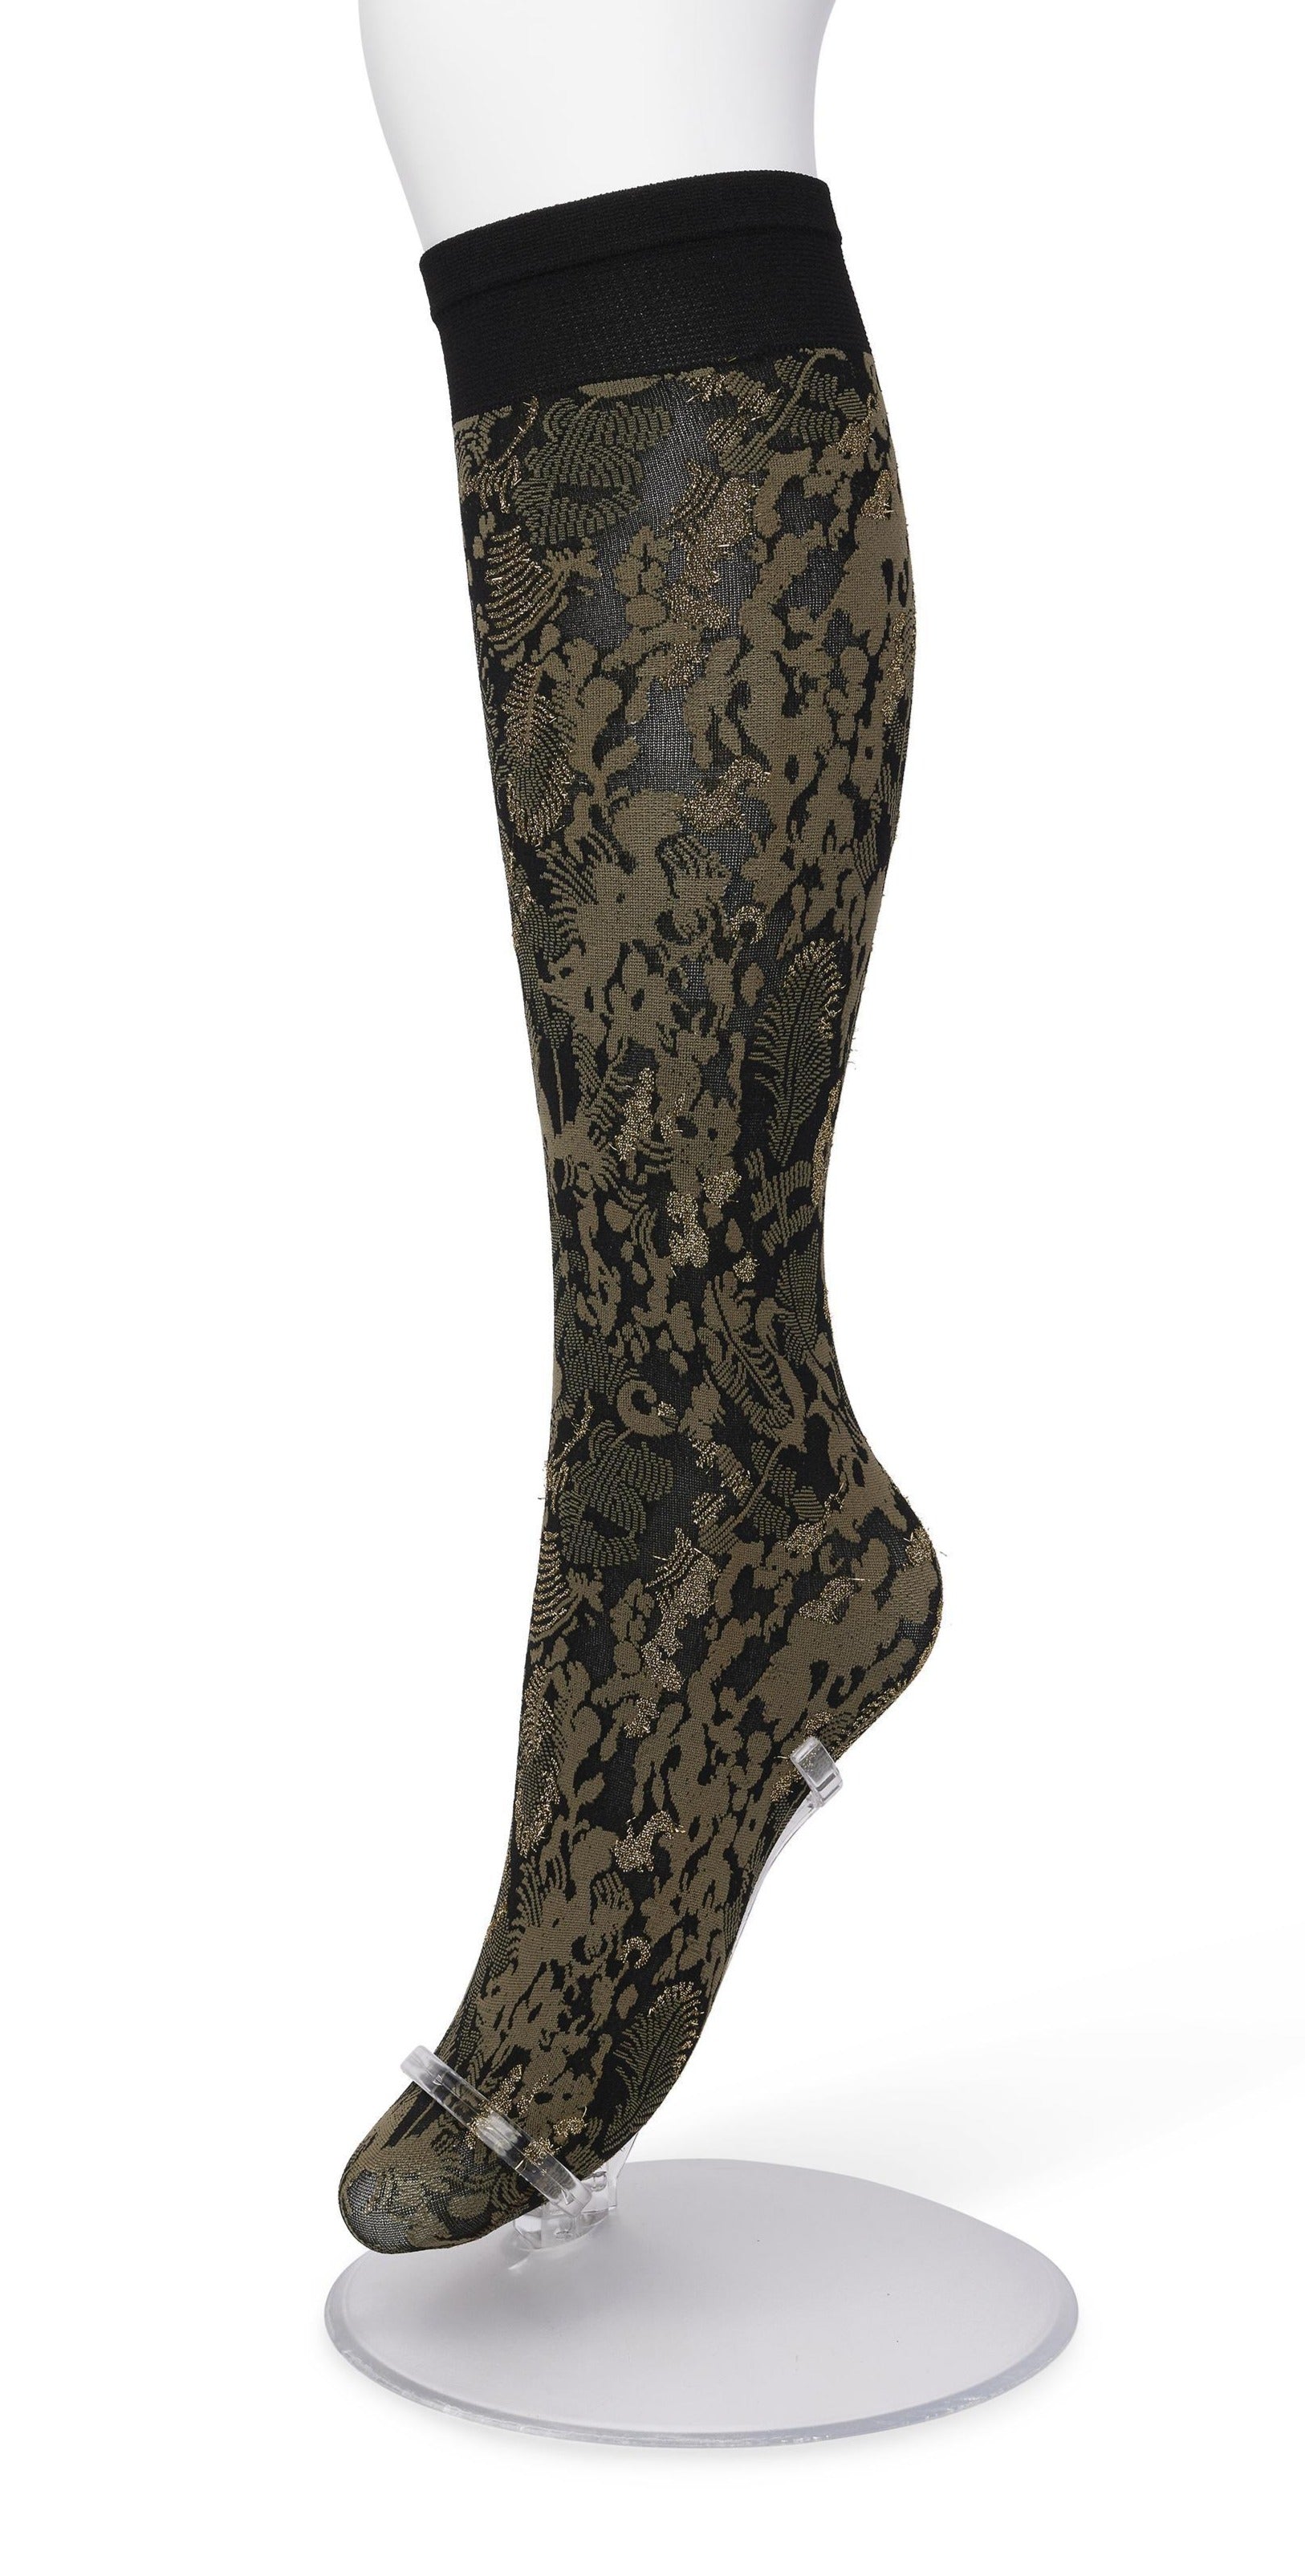 Bonnie Doon Botanical Lurex Knee-highs - Khaki green soft matte opaque fashion knee-high socks with a woven leaf style pattern in black and sparkly metallic gold and deep black comfort cuff.